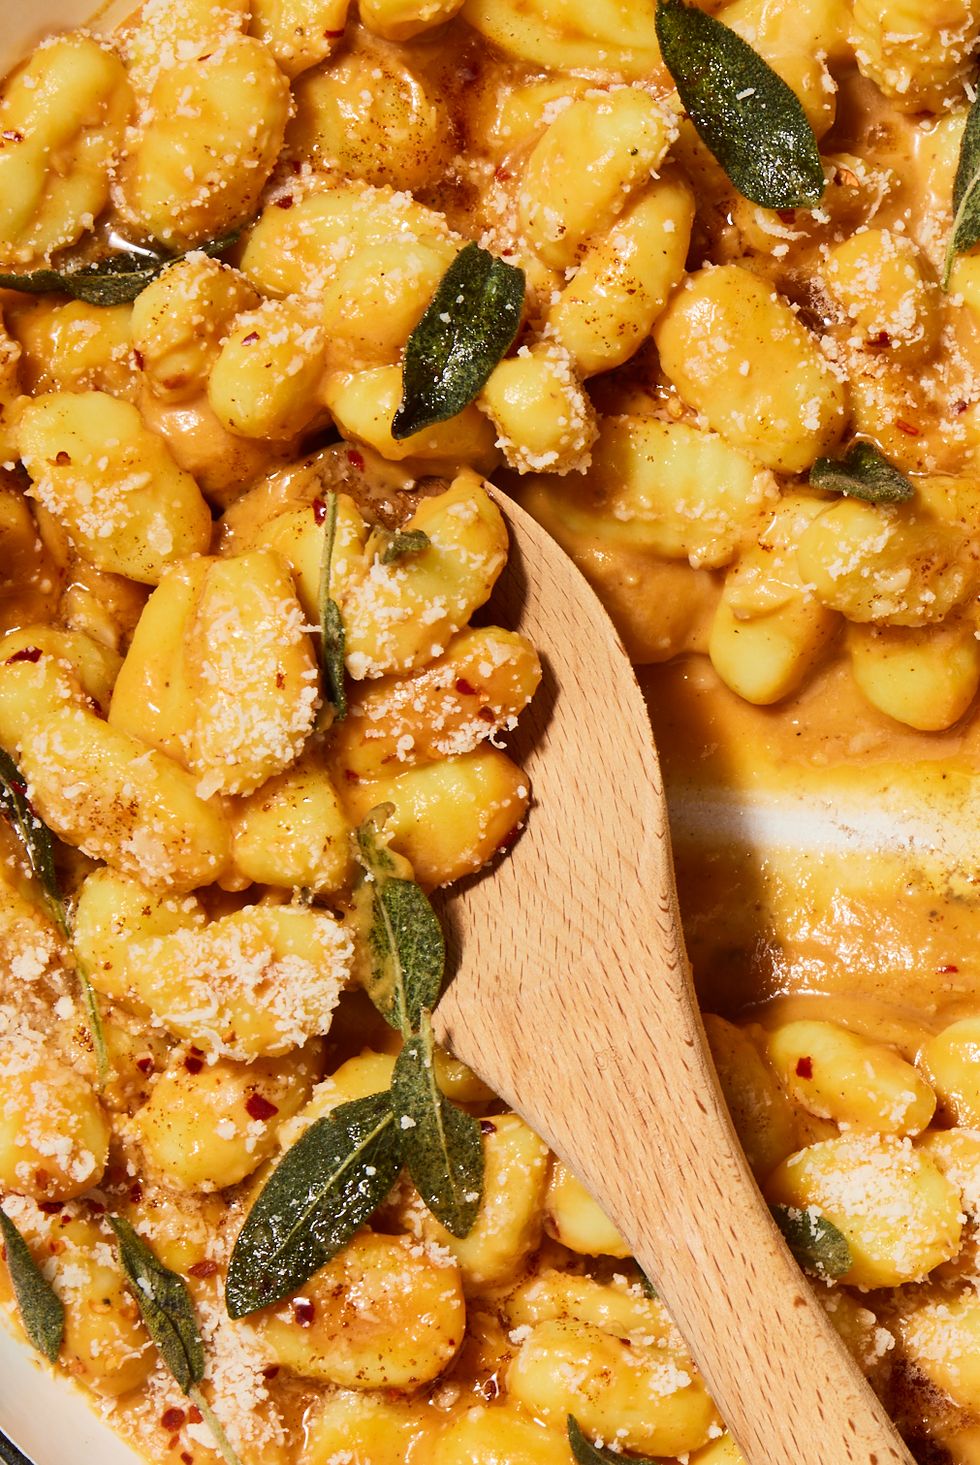 gnocchi tossed in a sweet potato maple brown butter sauce